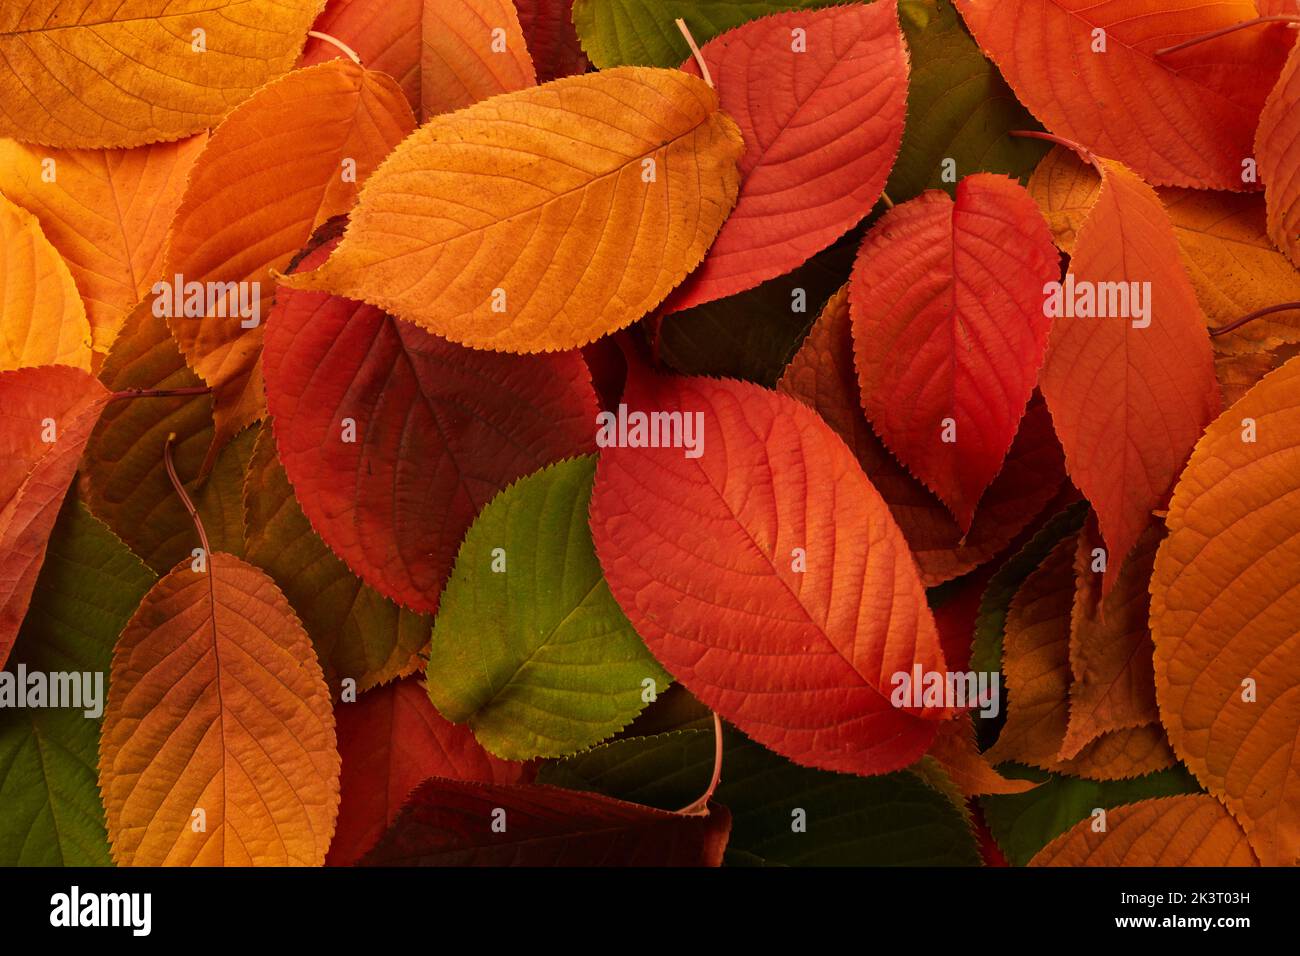 Autumn background. Multicolored leaves lie on the grass. Stock Photo